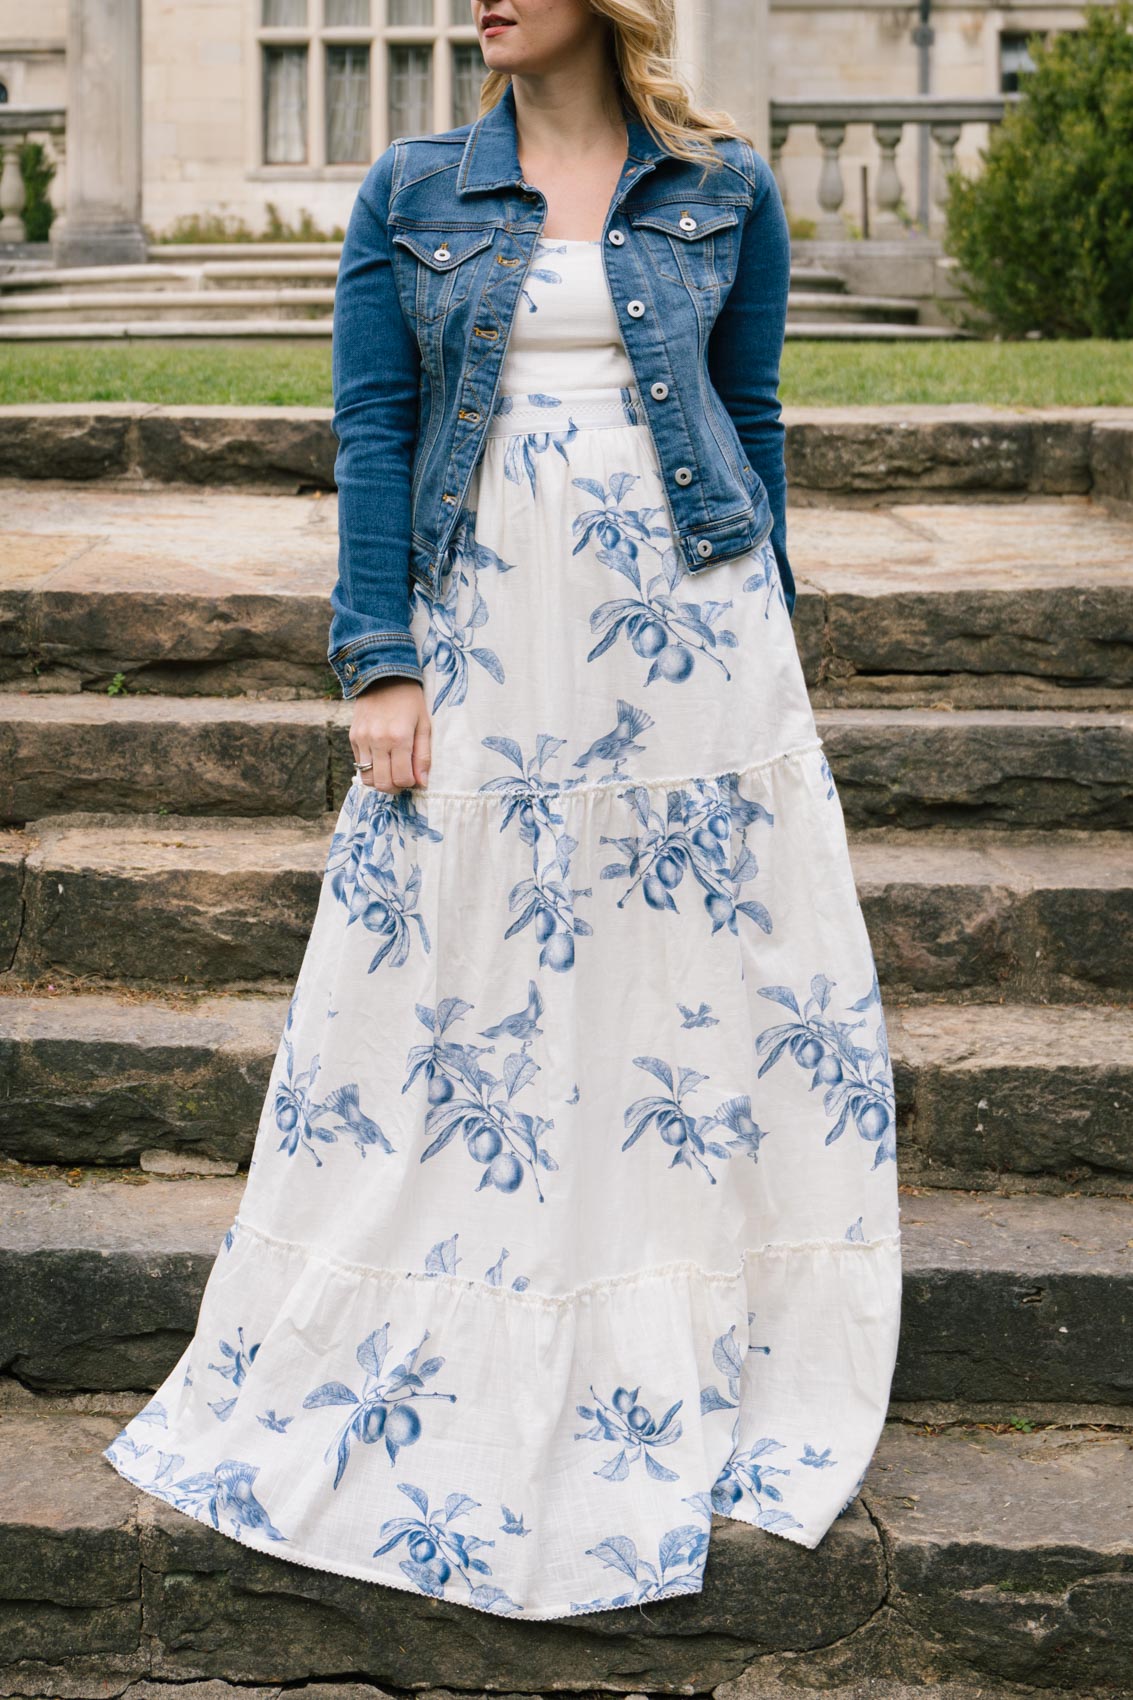 Classic white Dress: Agua Bendita maxi dress from Anthropologie layered with a classic denim jacket from Pilcro and the Letterpress